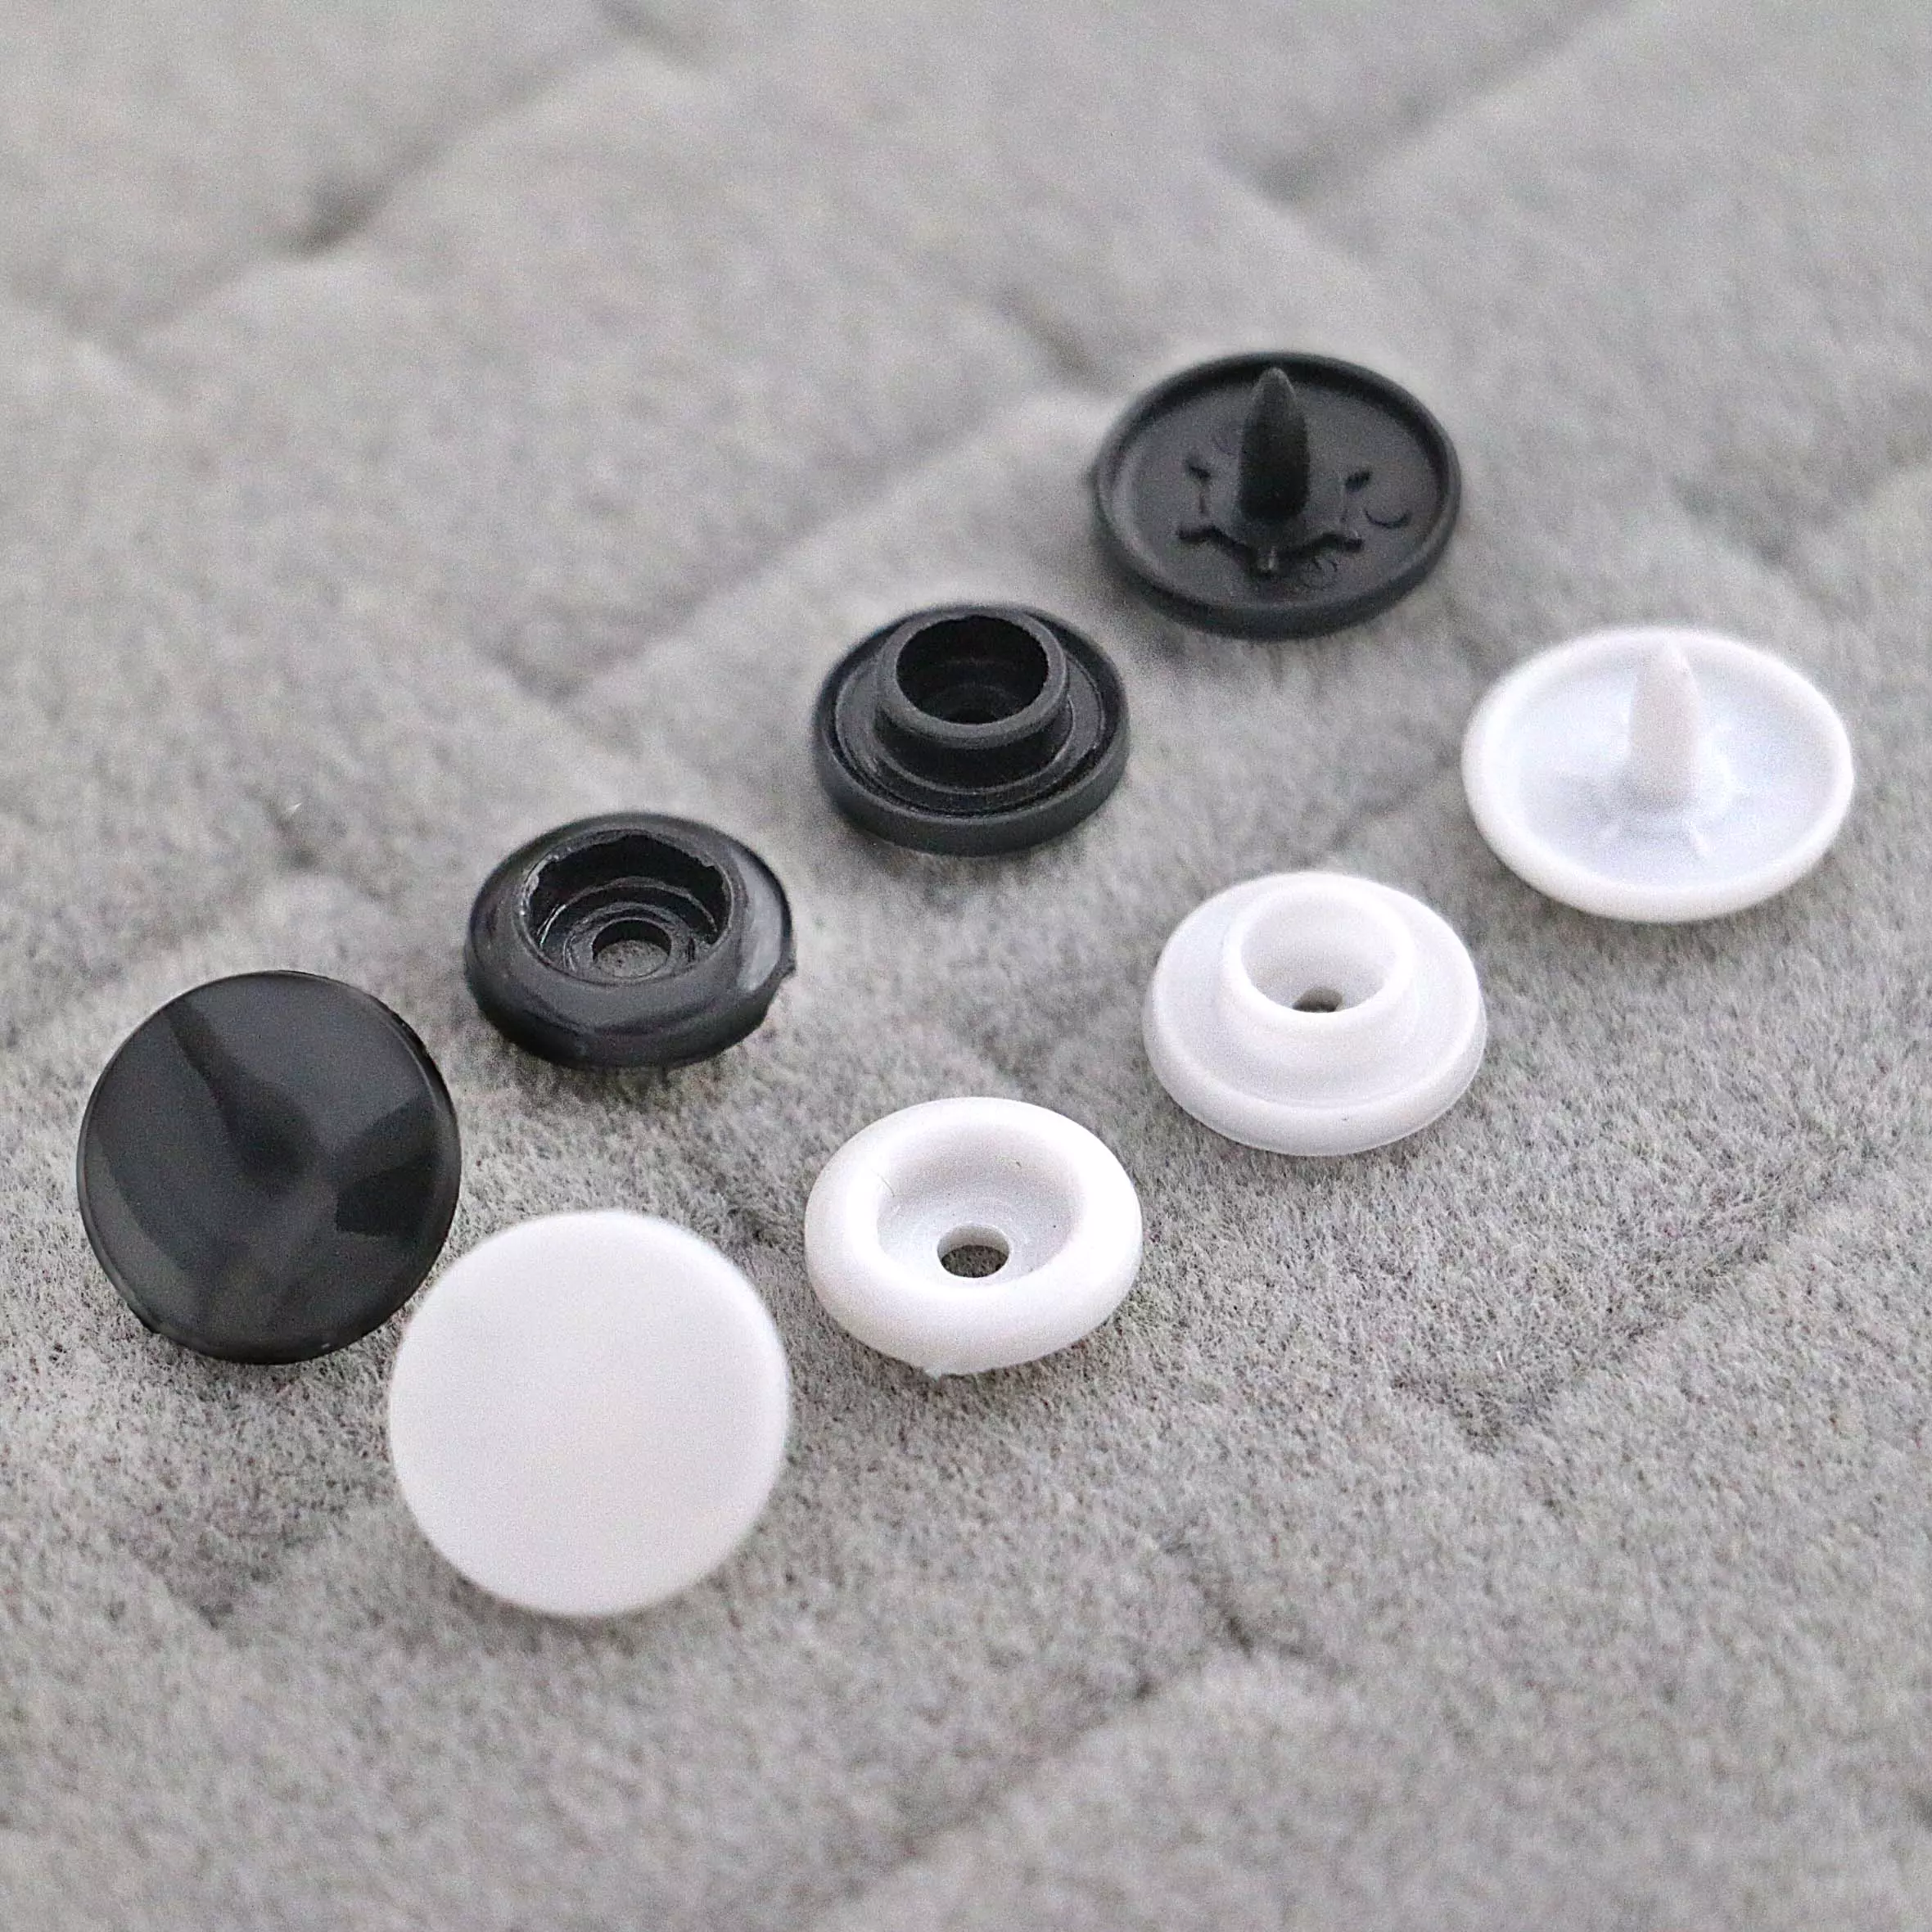  Plastic Snaps for Clothing,Snap Fasteners Buttons Size